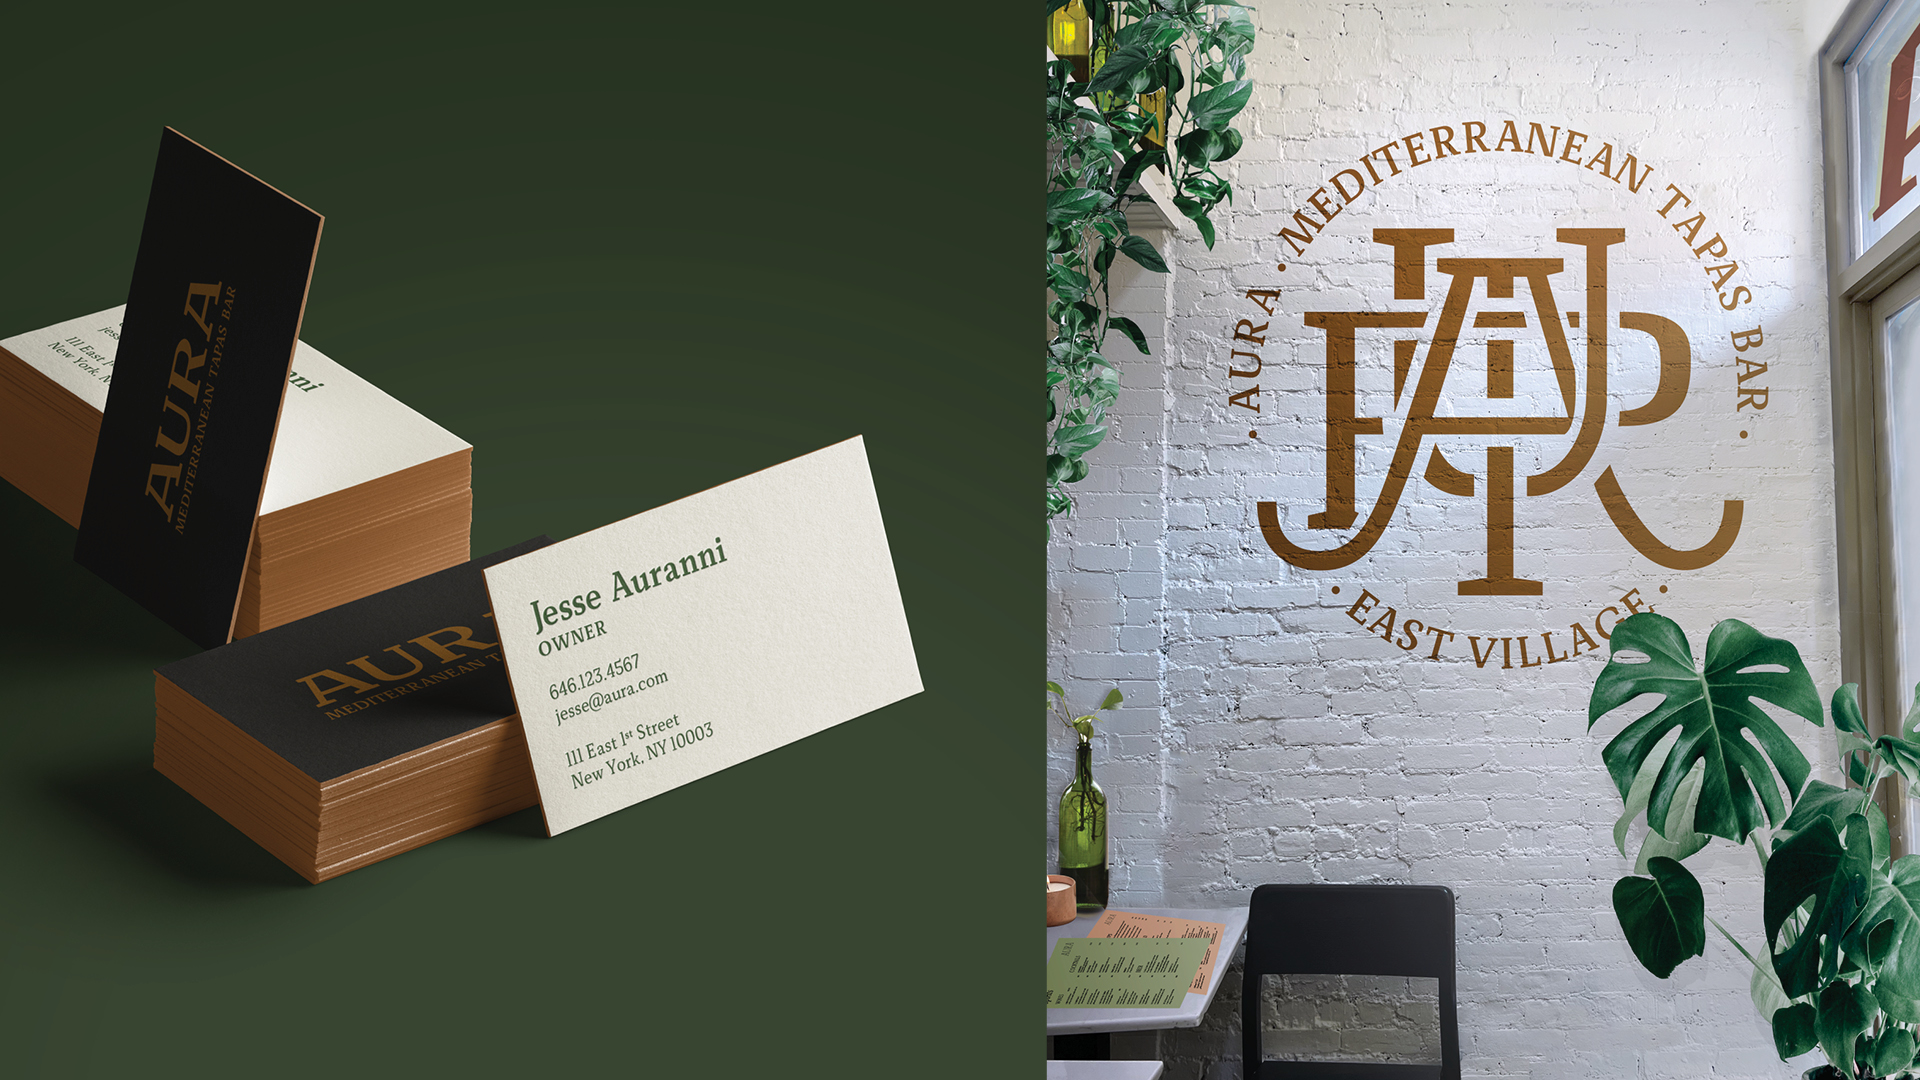 Restaurant Identity with Zampa — business card and signage